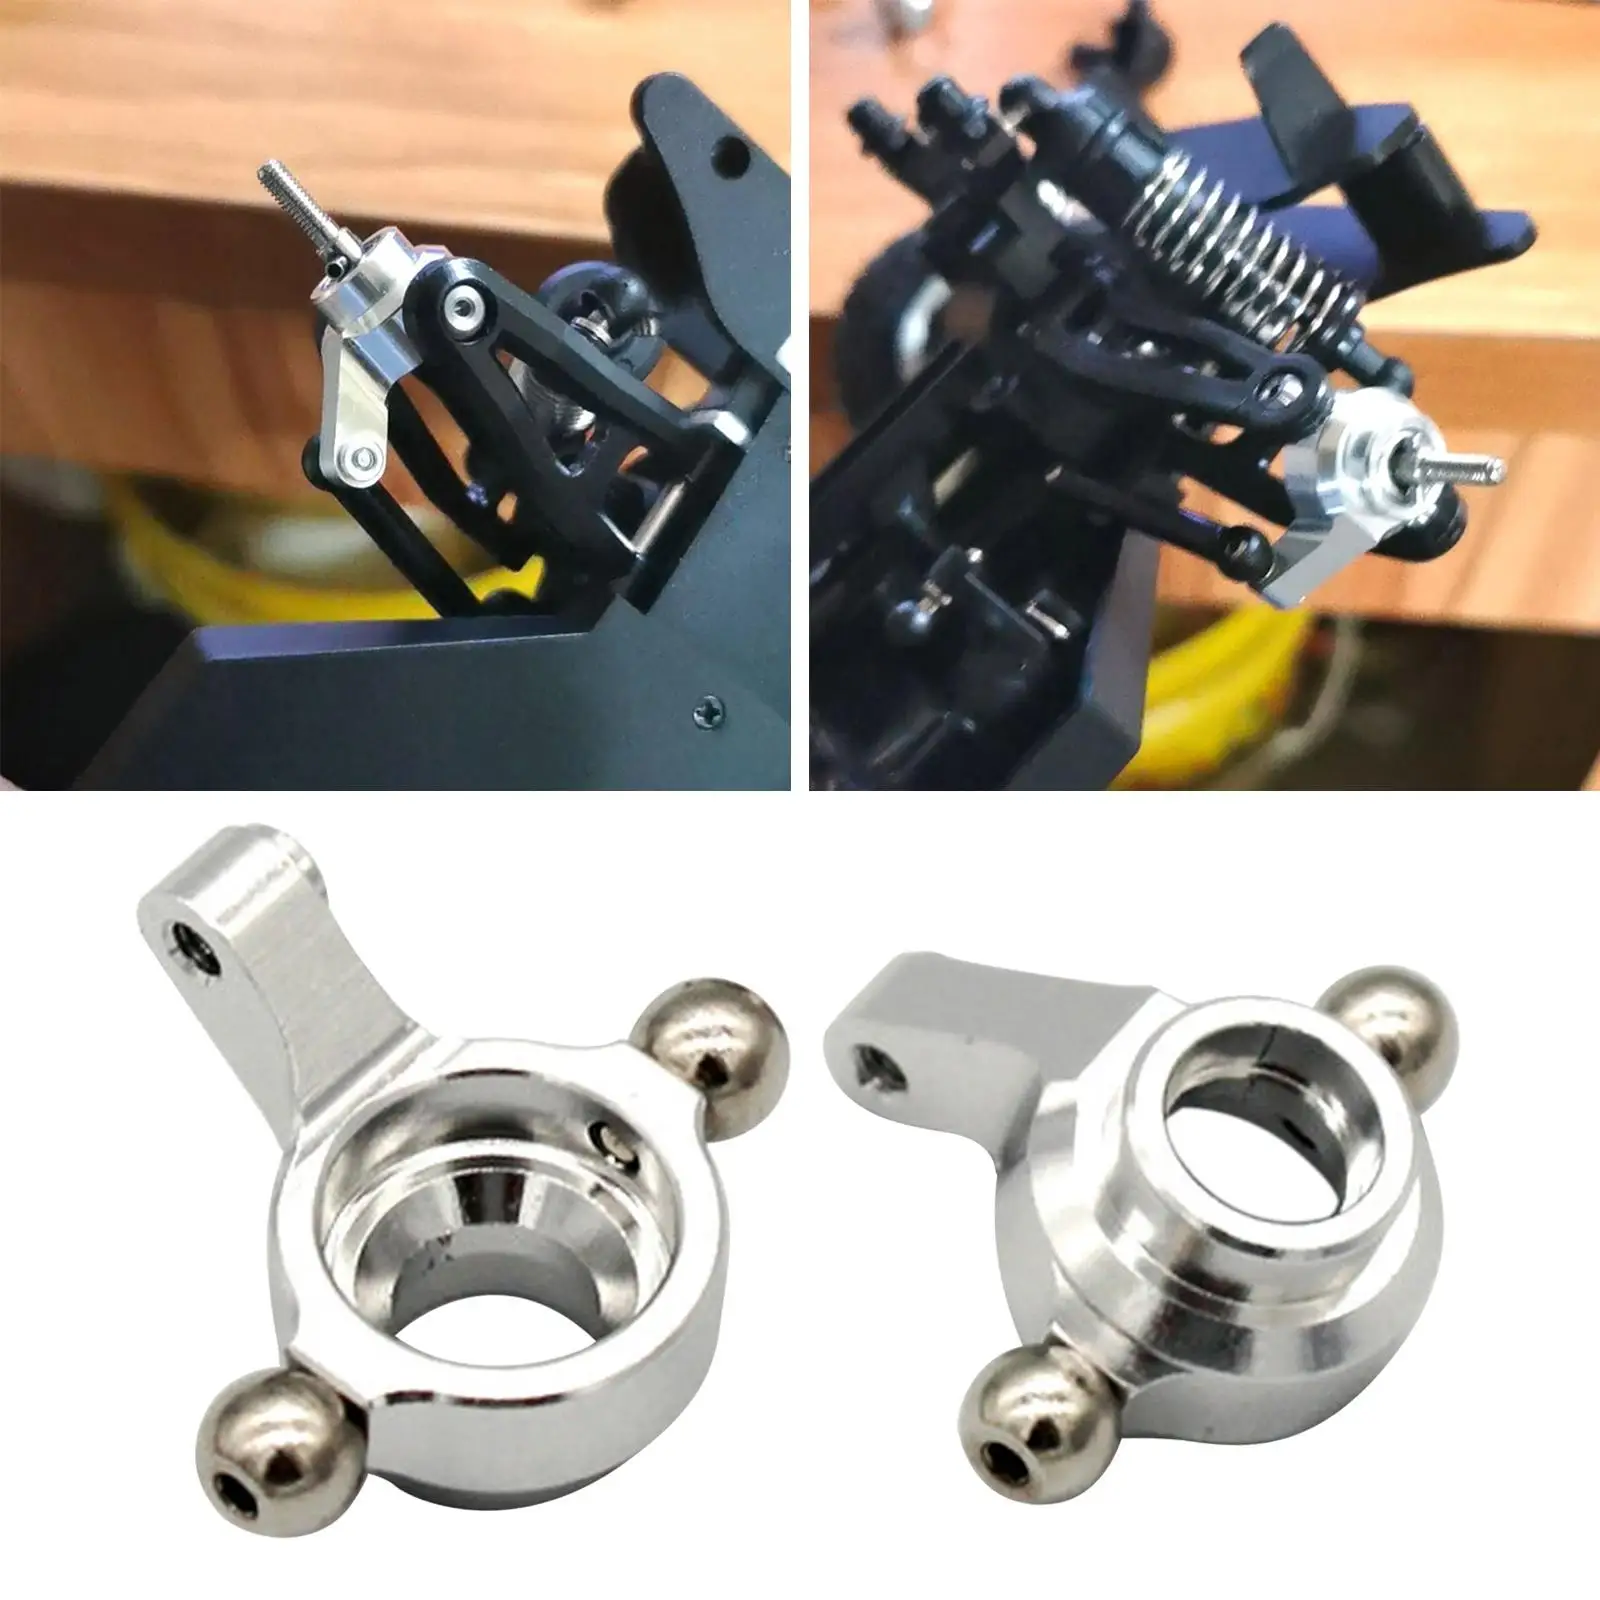 RC Car Steering Knuckles fit for SG1603 SG1604 1/16 Scale Drifts Car Vehicle